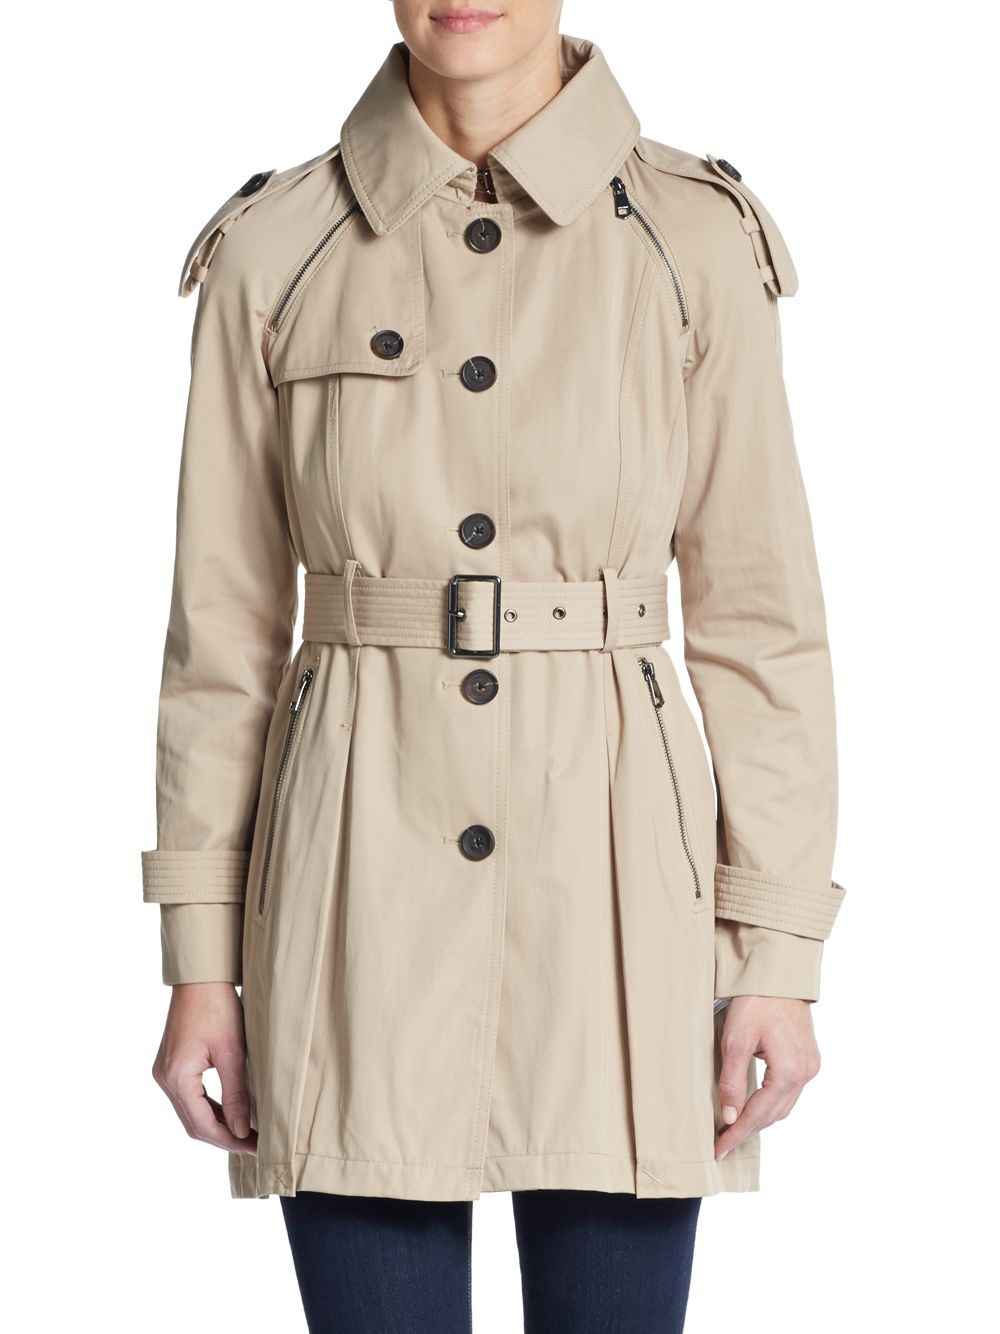 French Connection Hooded Cotton-Blend Trench Coat in Khaki (Natural) - Lyst